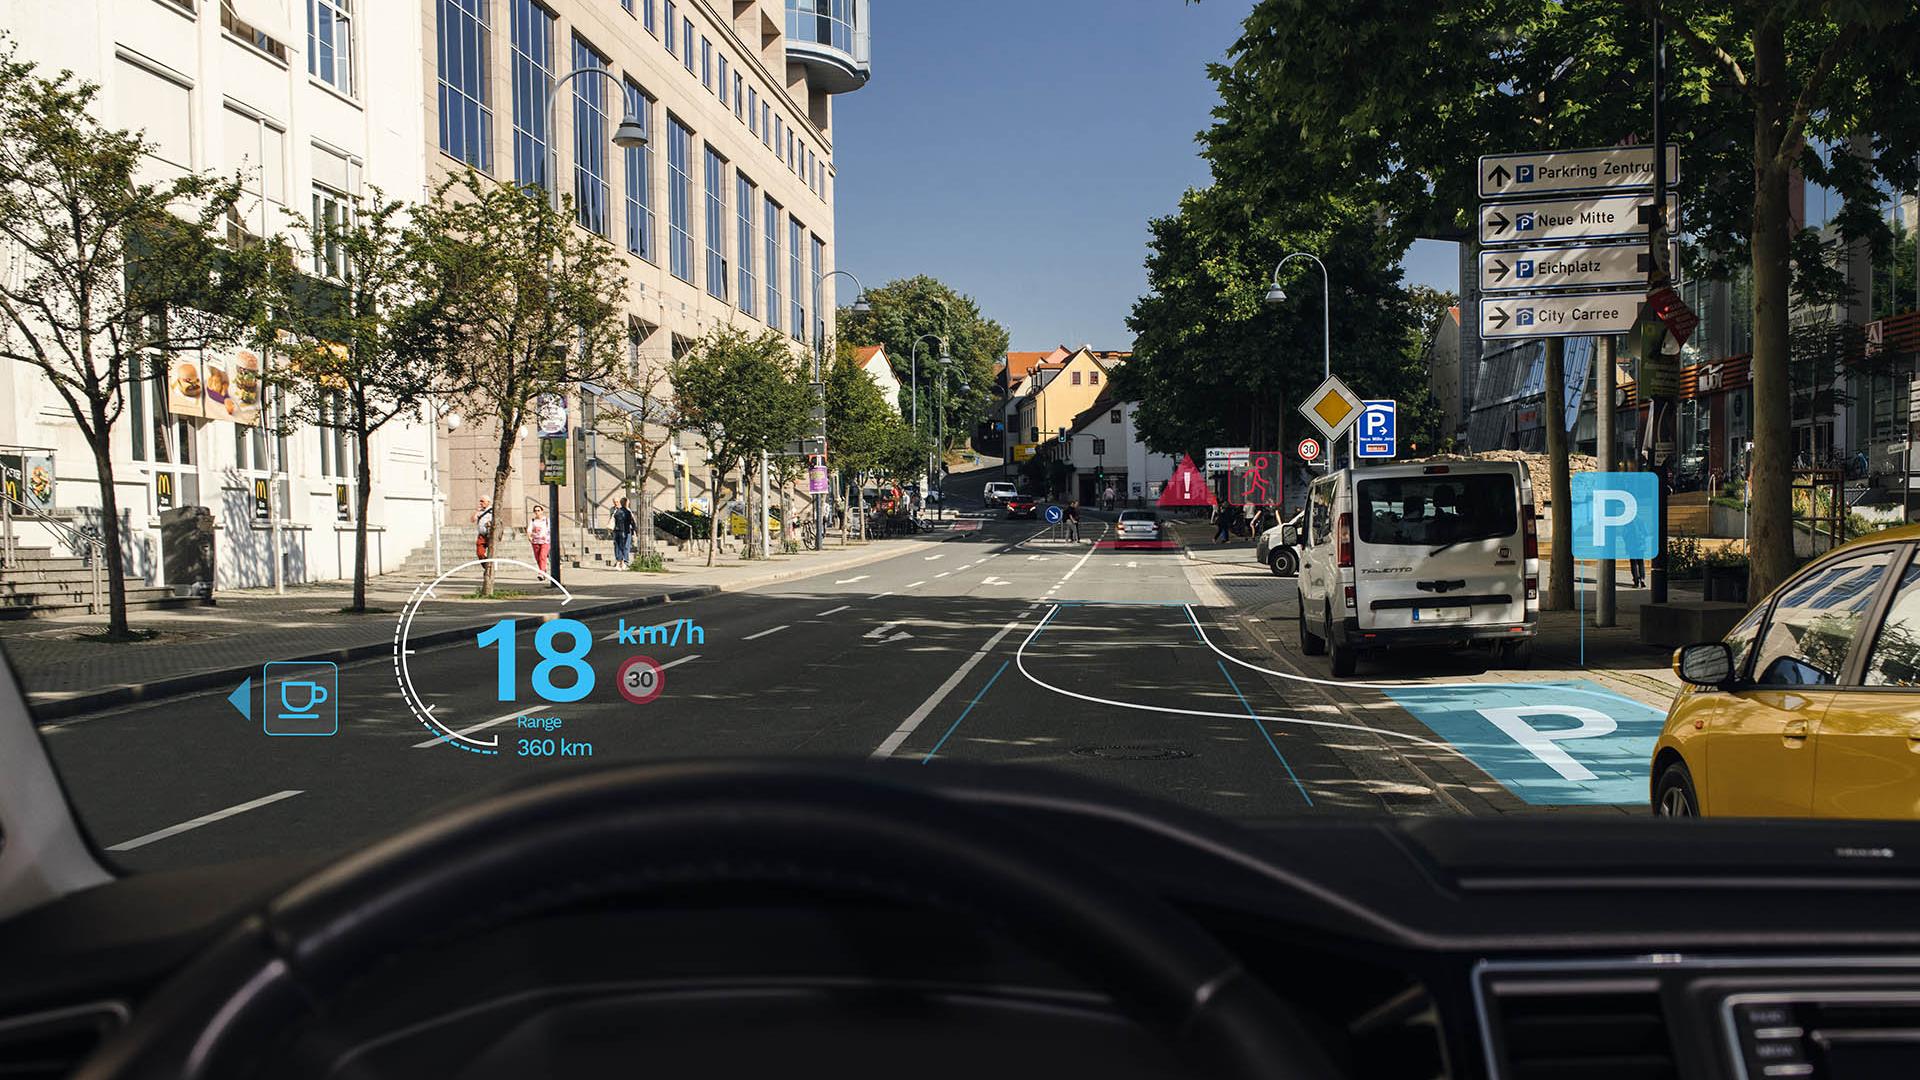 Holographic augmented reality head-up displays based on ZEISS Multifunctional Smart Glass project important information ahead of drivers so they can keep their eyes on the road.